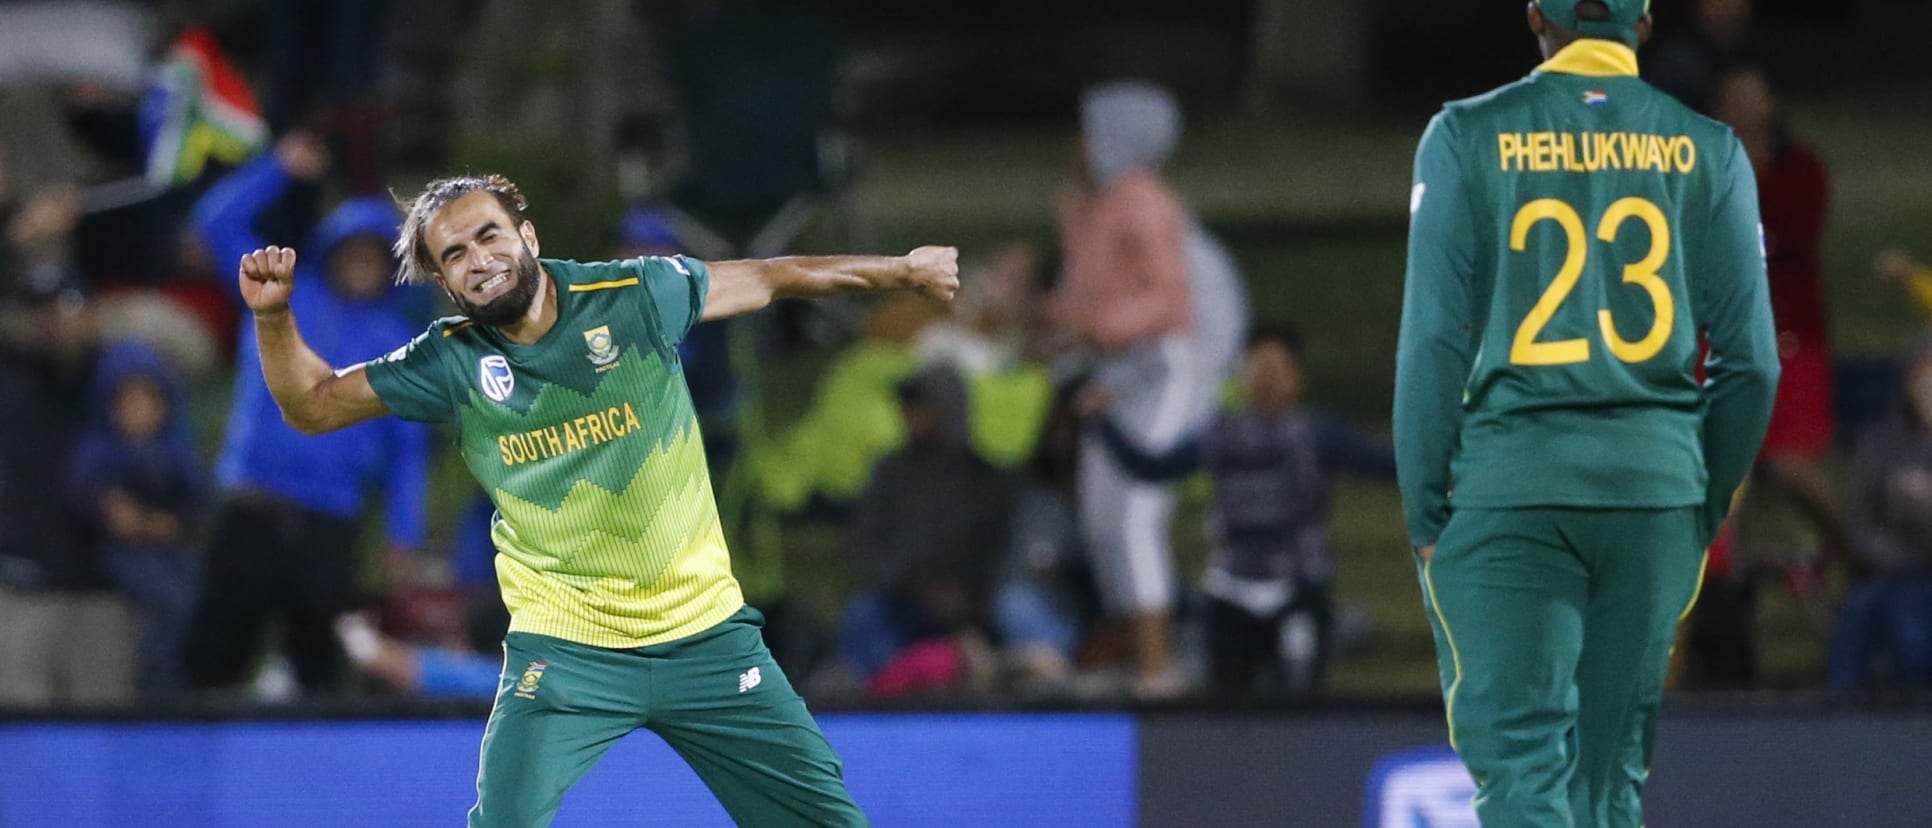 Imran Tahir became only the fourth South African to take three hat-tricks in ODIs